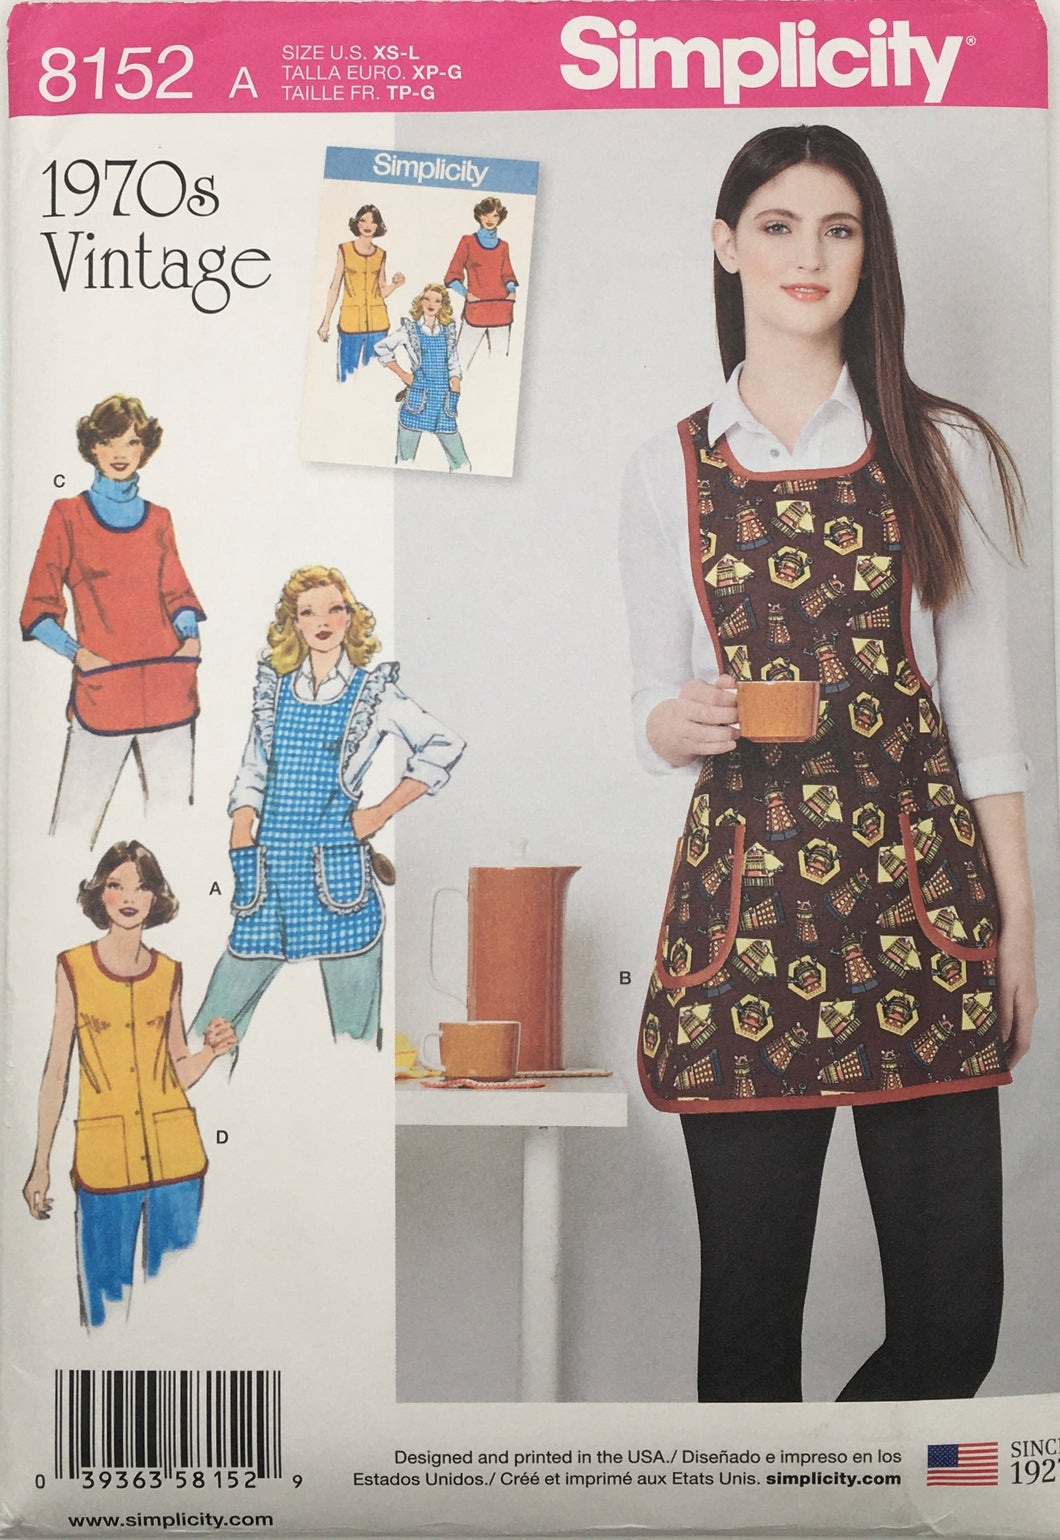 1970’s Reproduction Vintage Sewing Pattern: Simplicity 8152